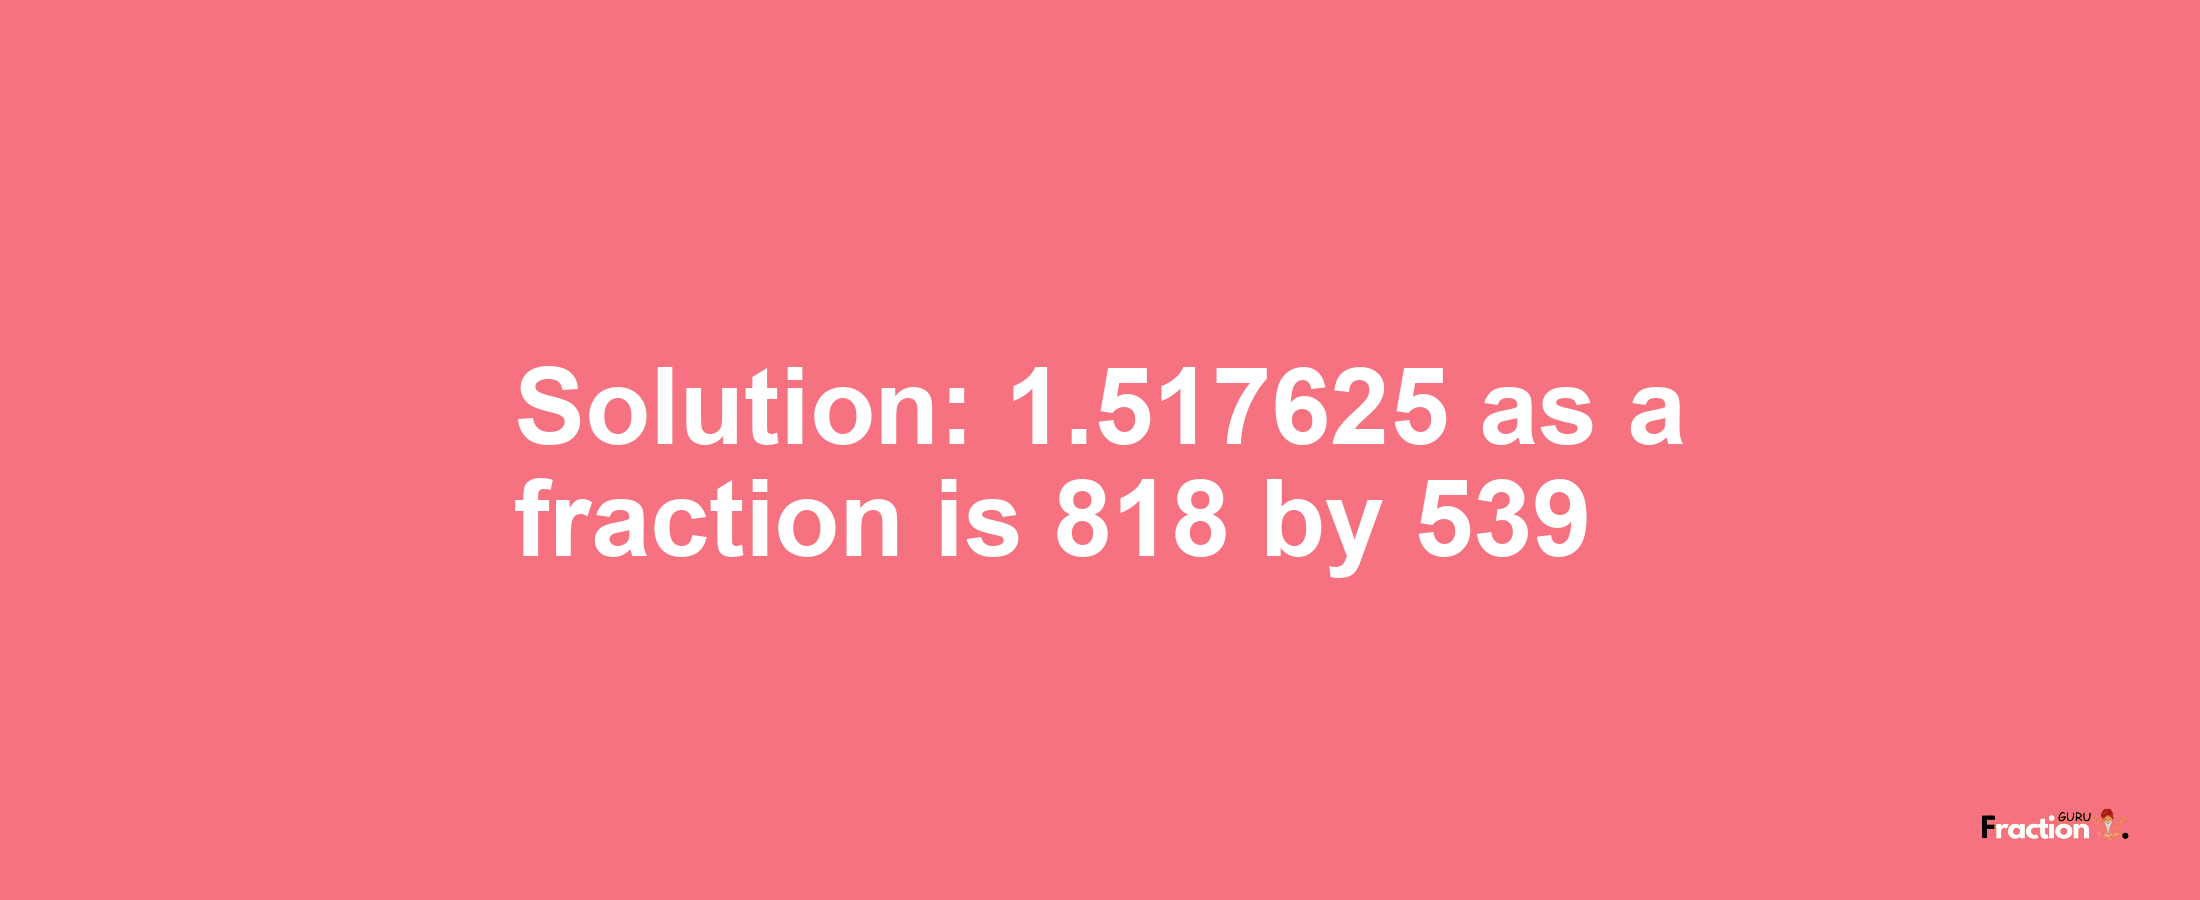 Solution:1.517625 as a fraction is 818/539